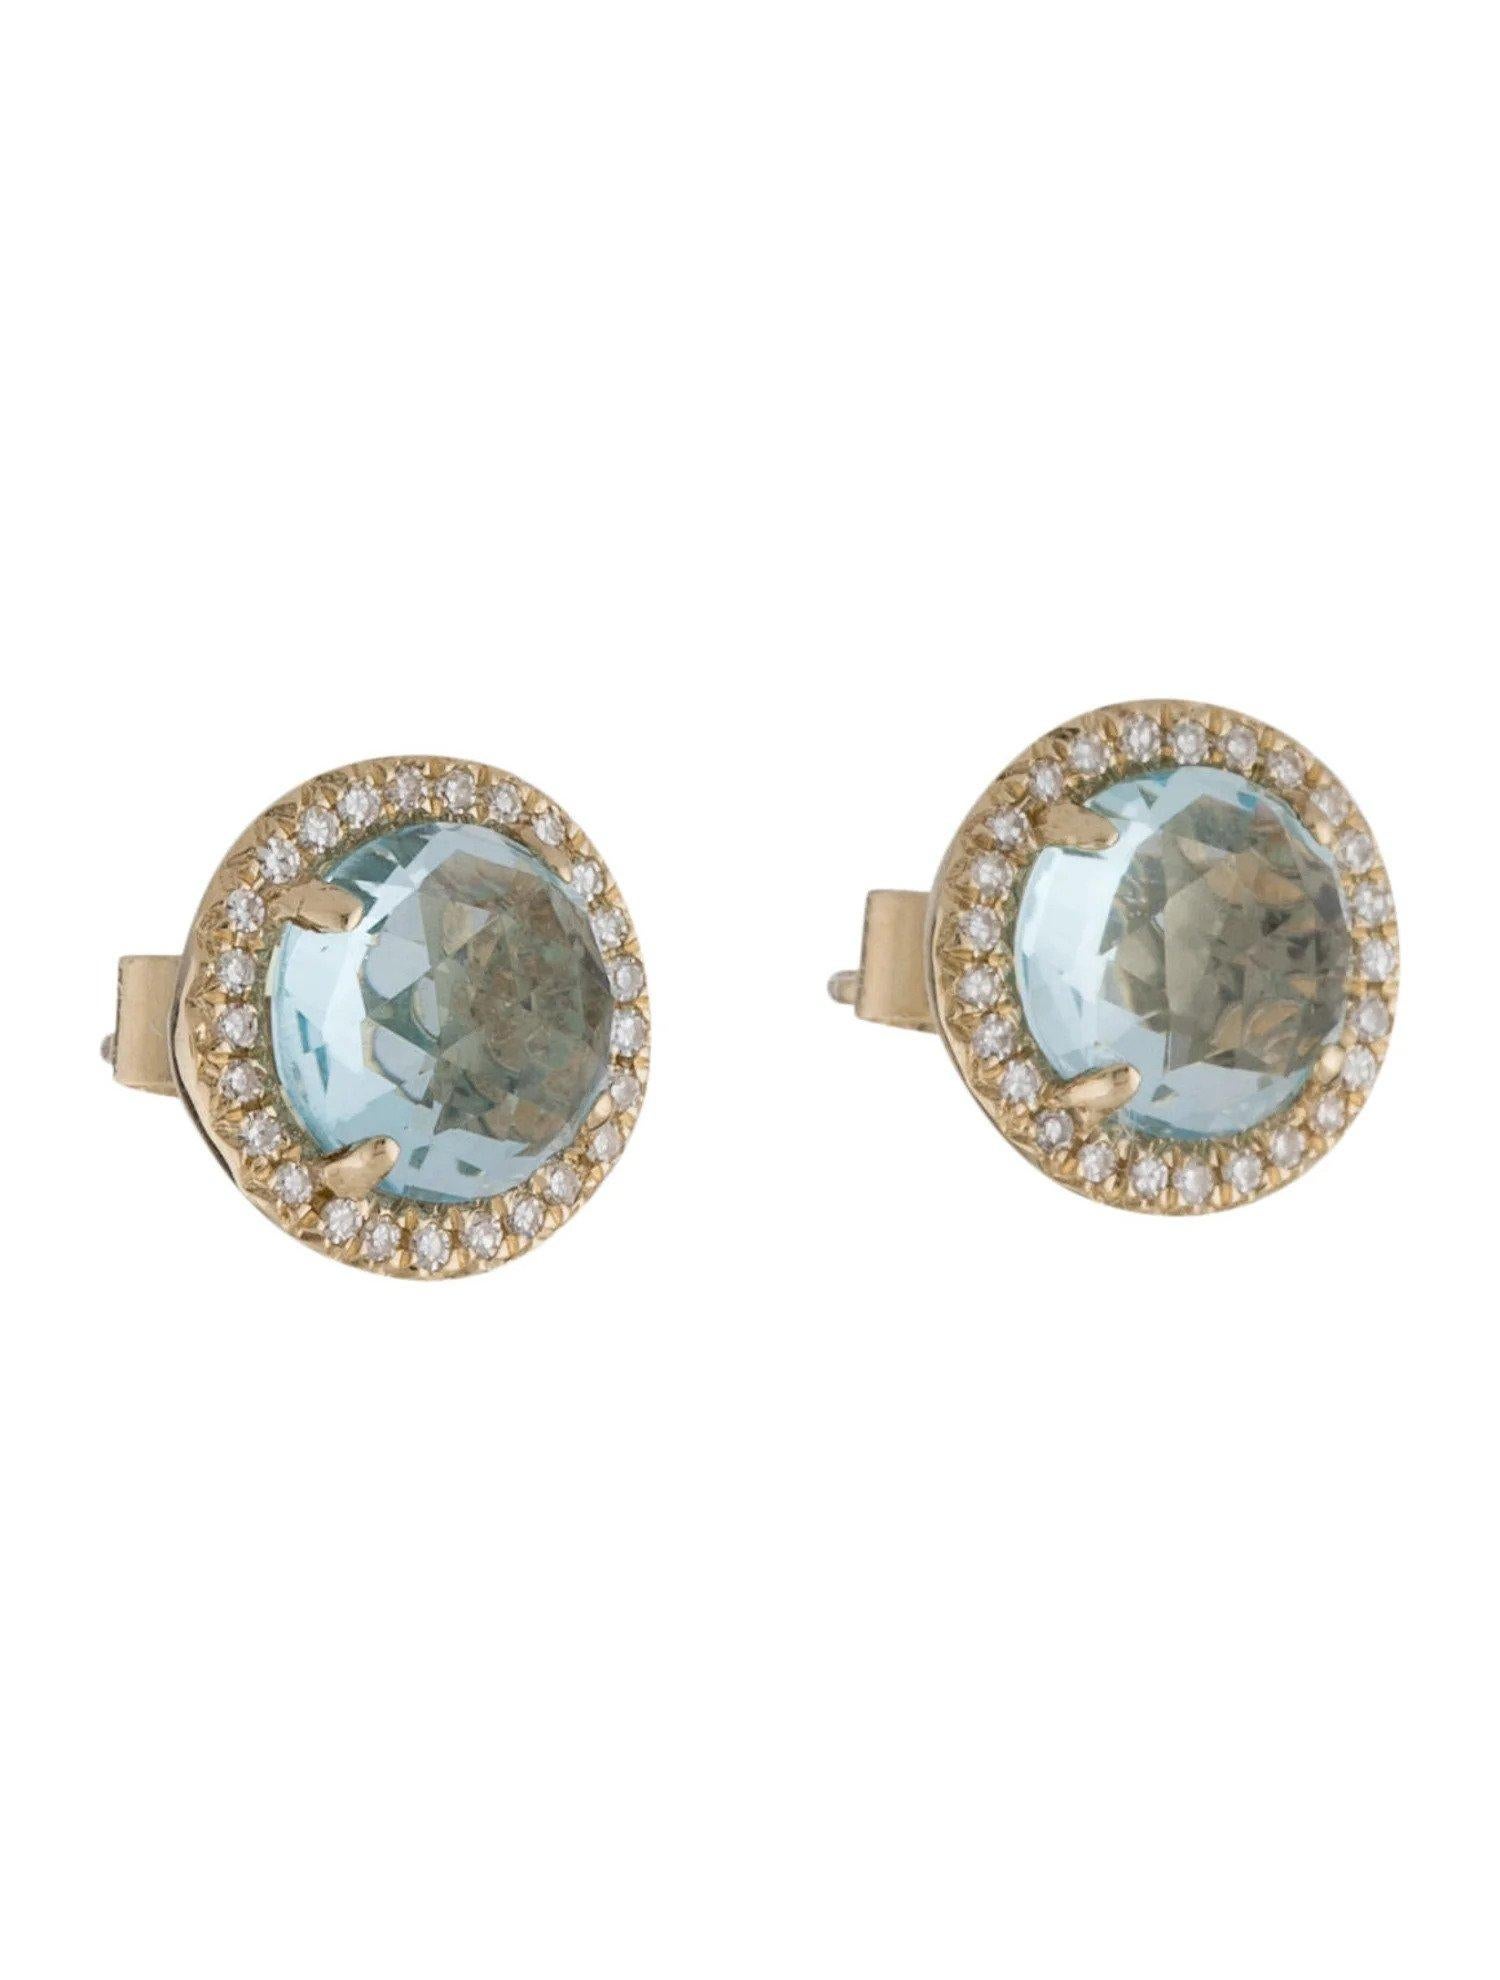 2.39 Carat Round Blue Topaz & Diamond Yellow Gold Stud Earrings In New Condition For Sale In Great Neck, NY